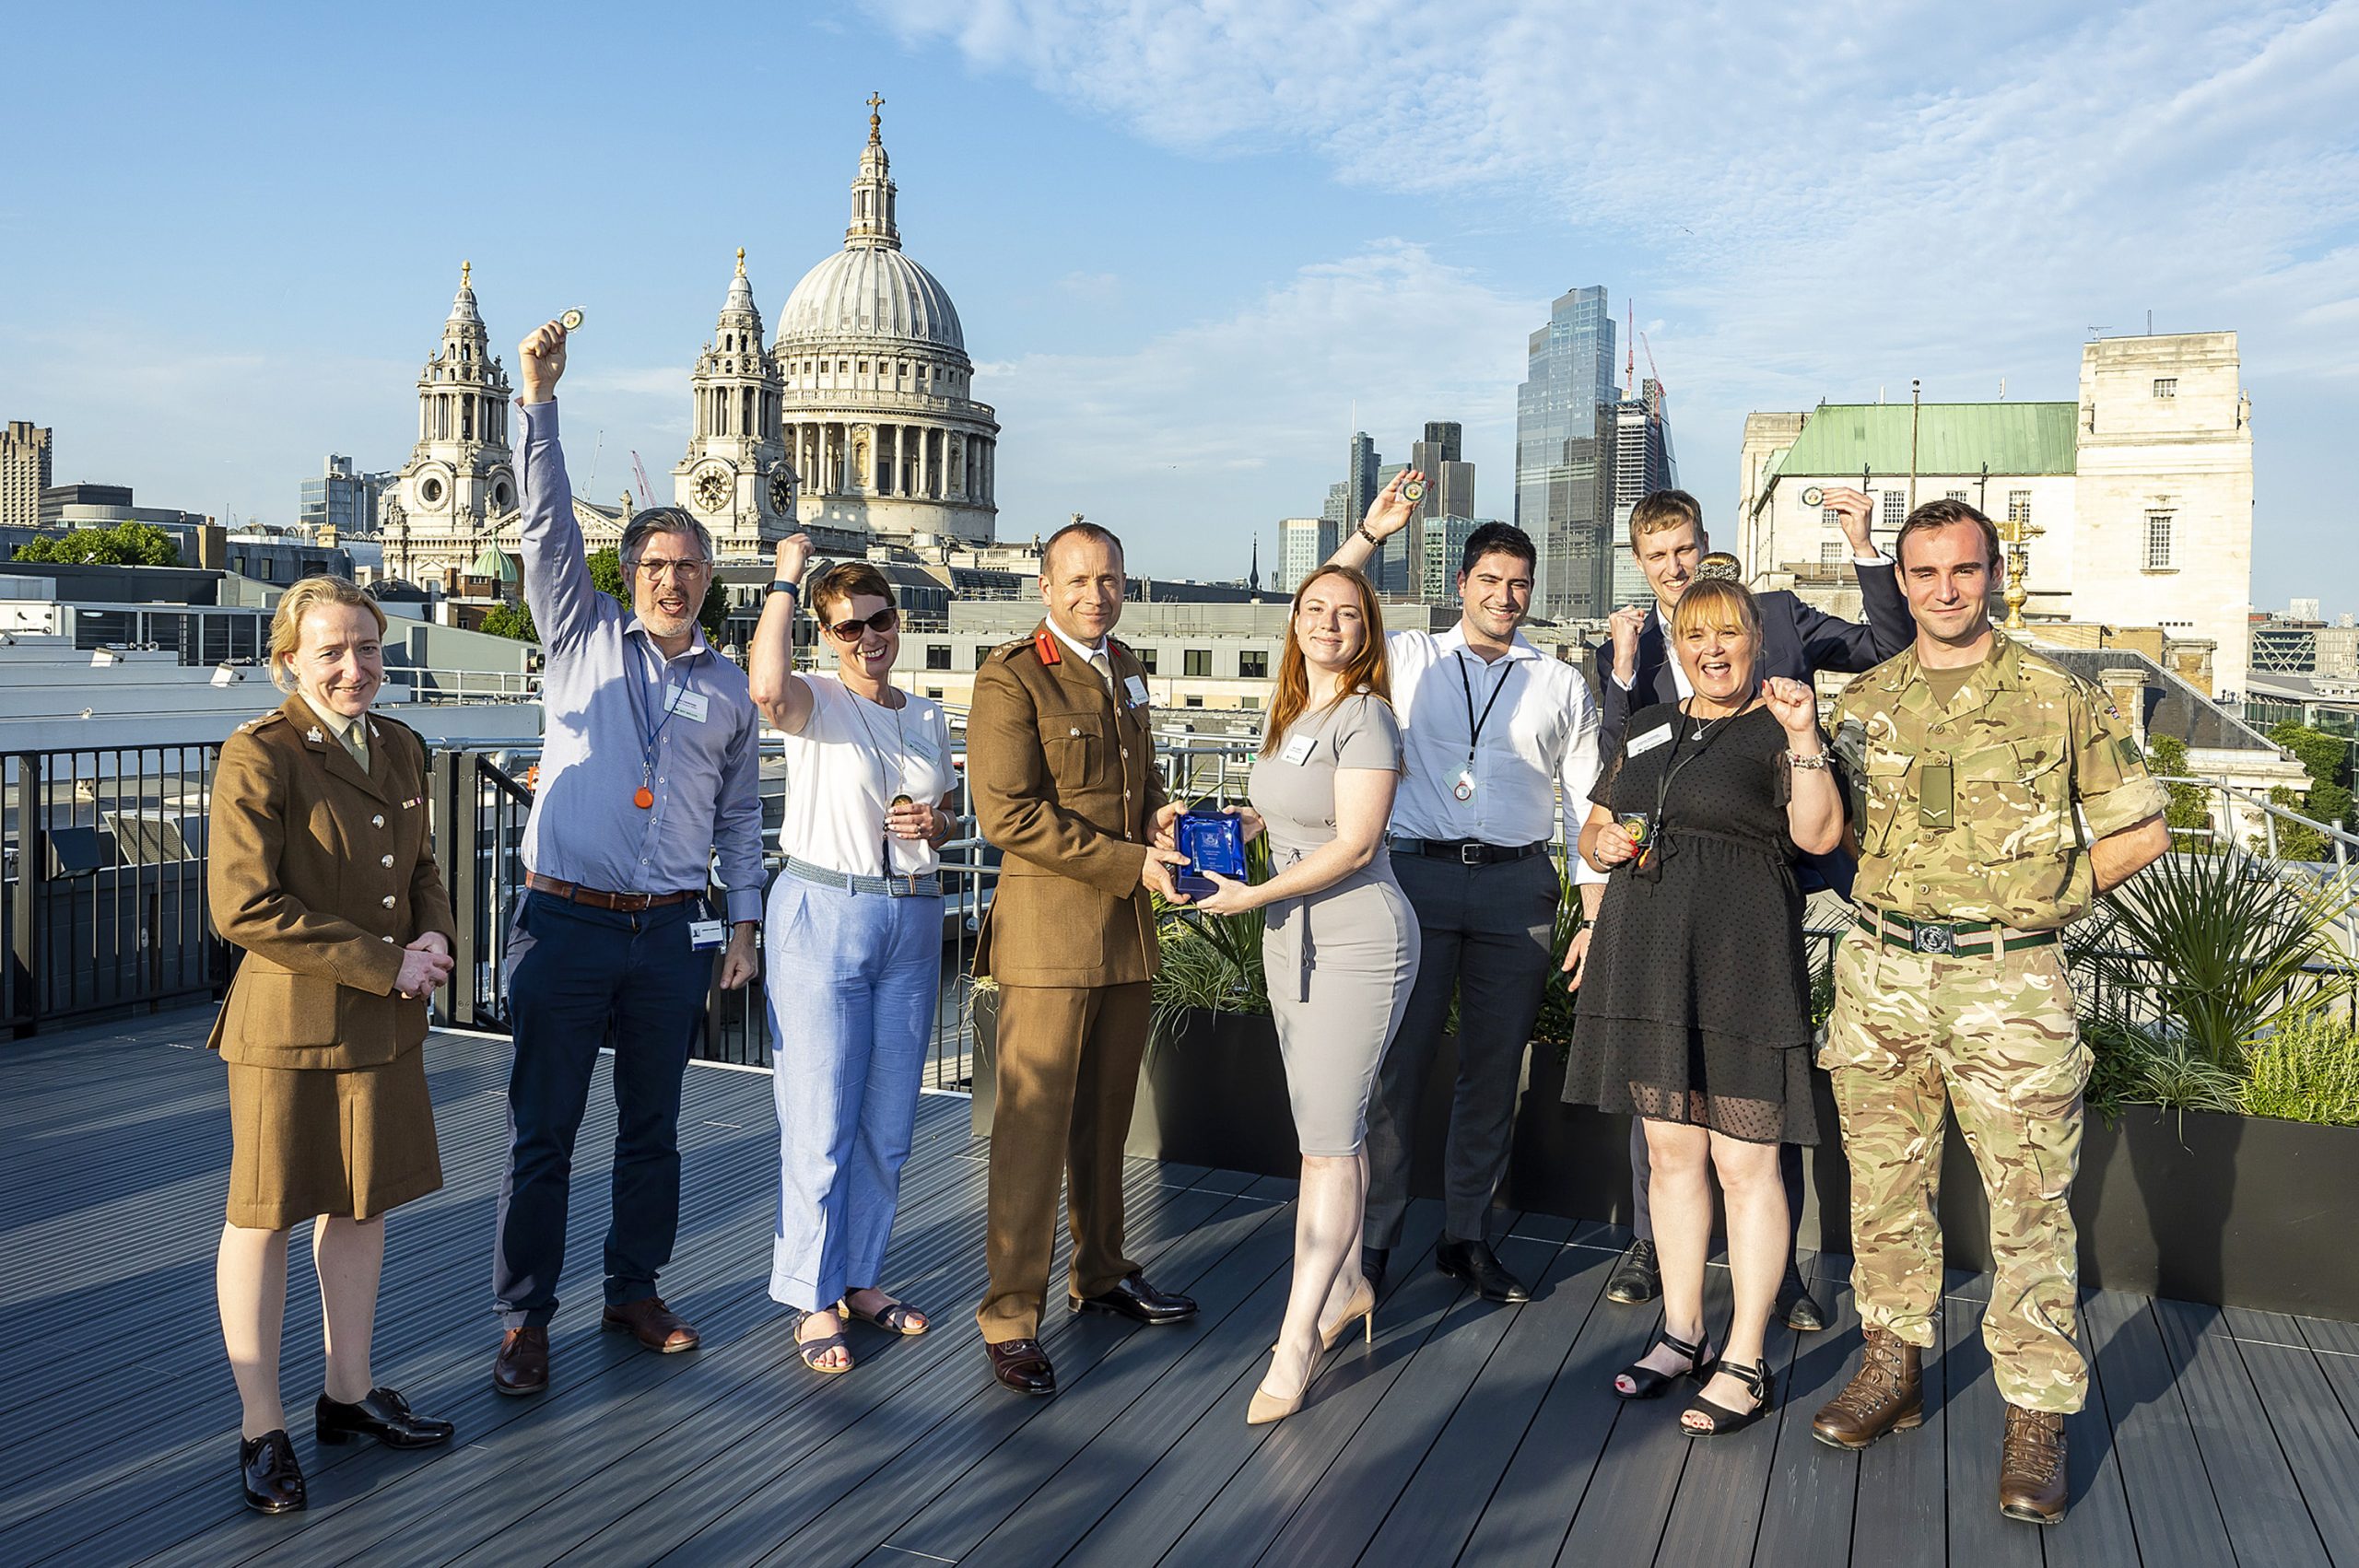 The winners of the 3MI Intelligence challenge celebrating their success on a rooftop in front of the St. Pauls Cathedral